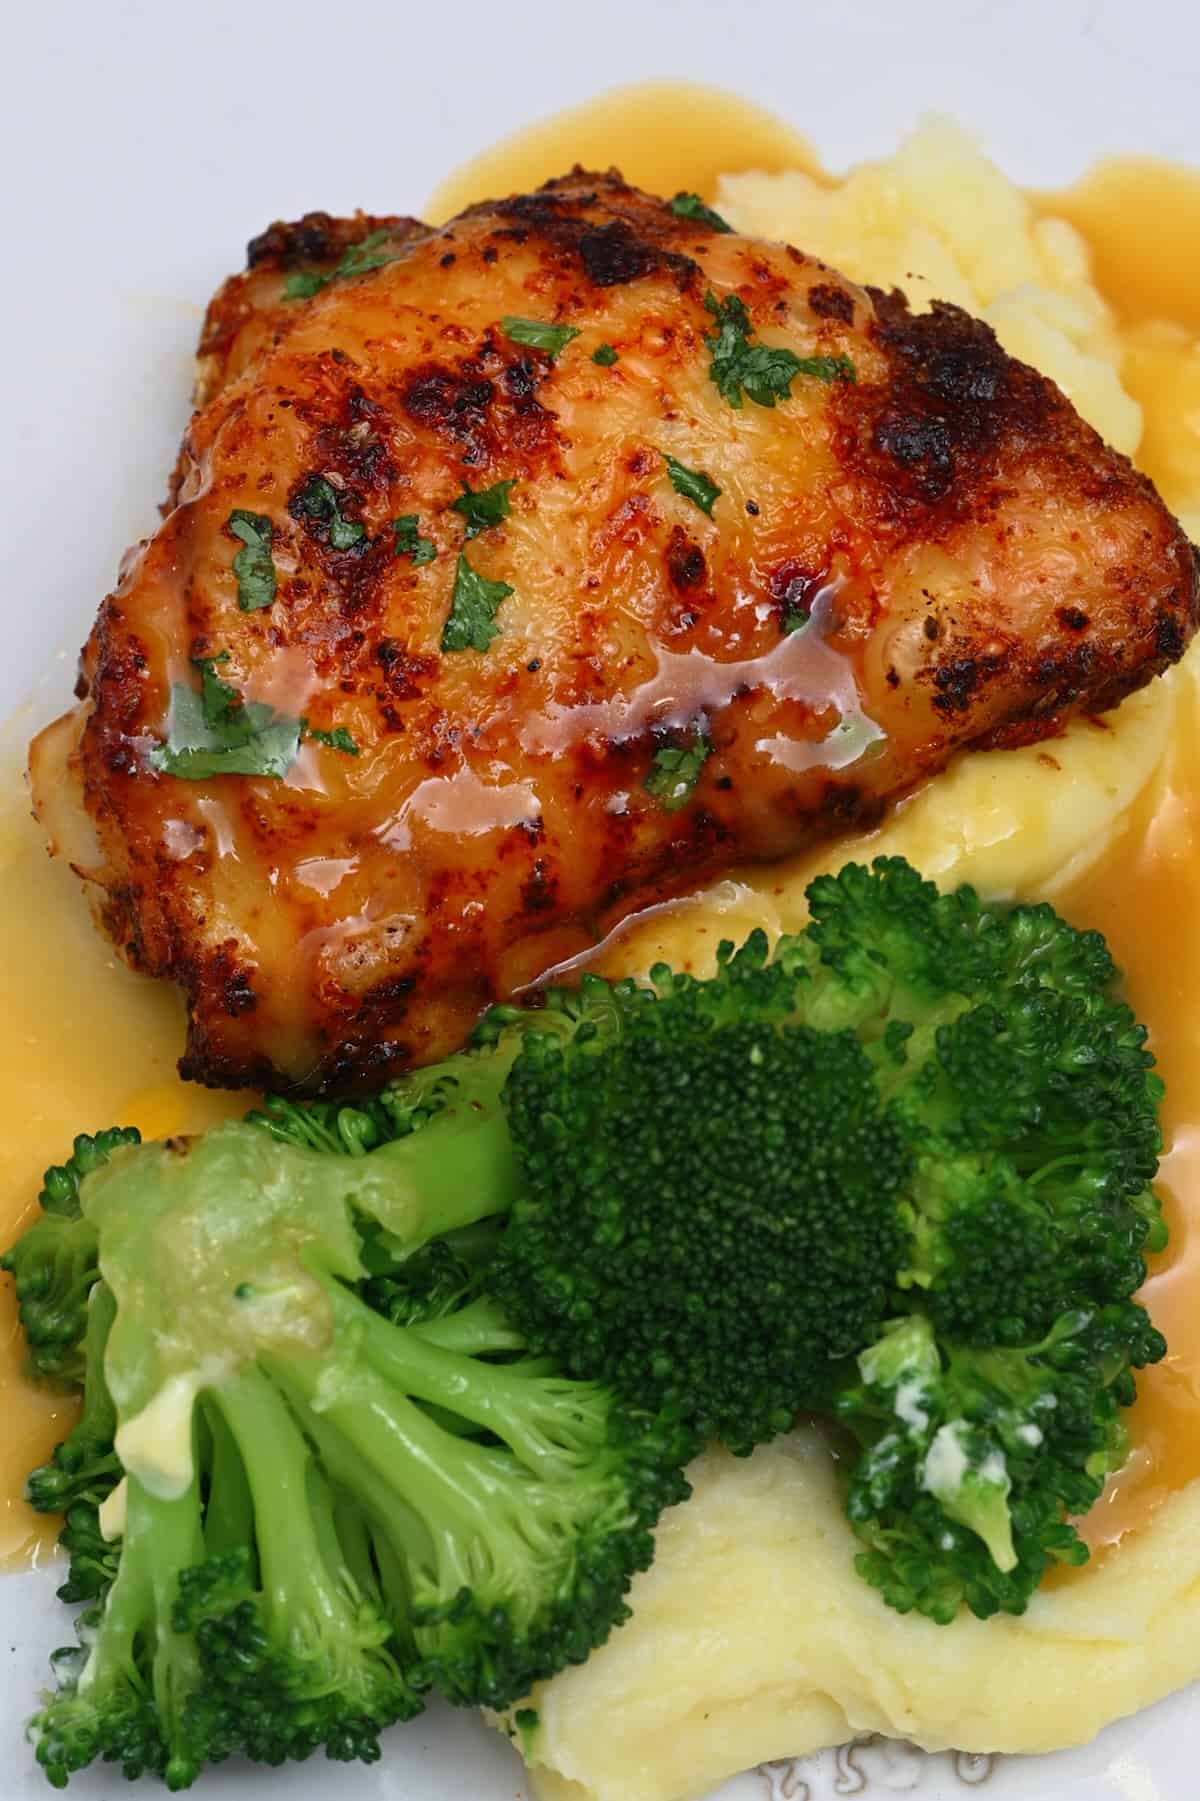 A serving of air fried chicken thighs with broccoli